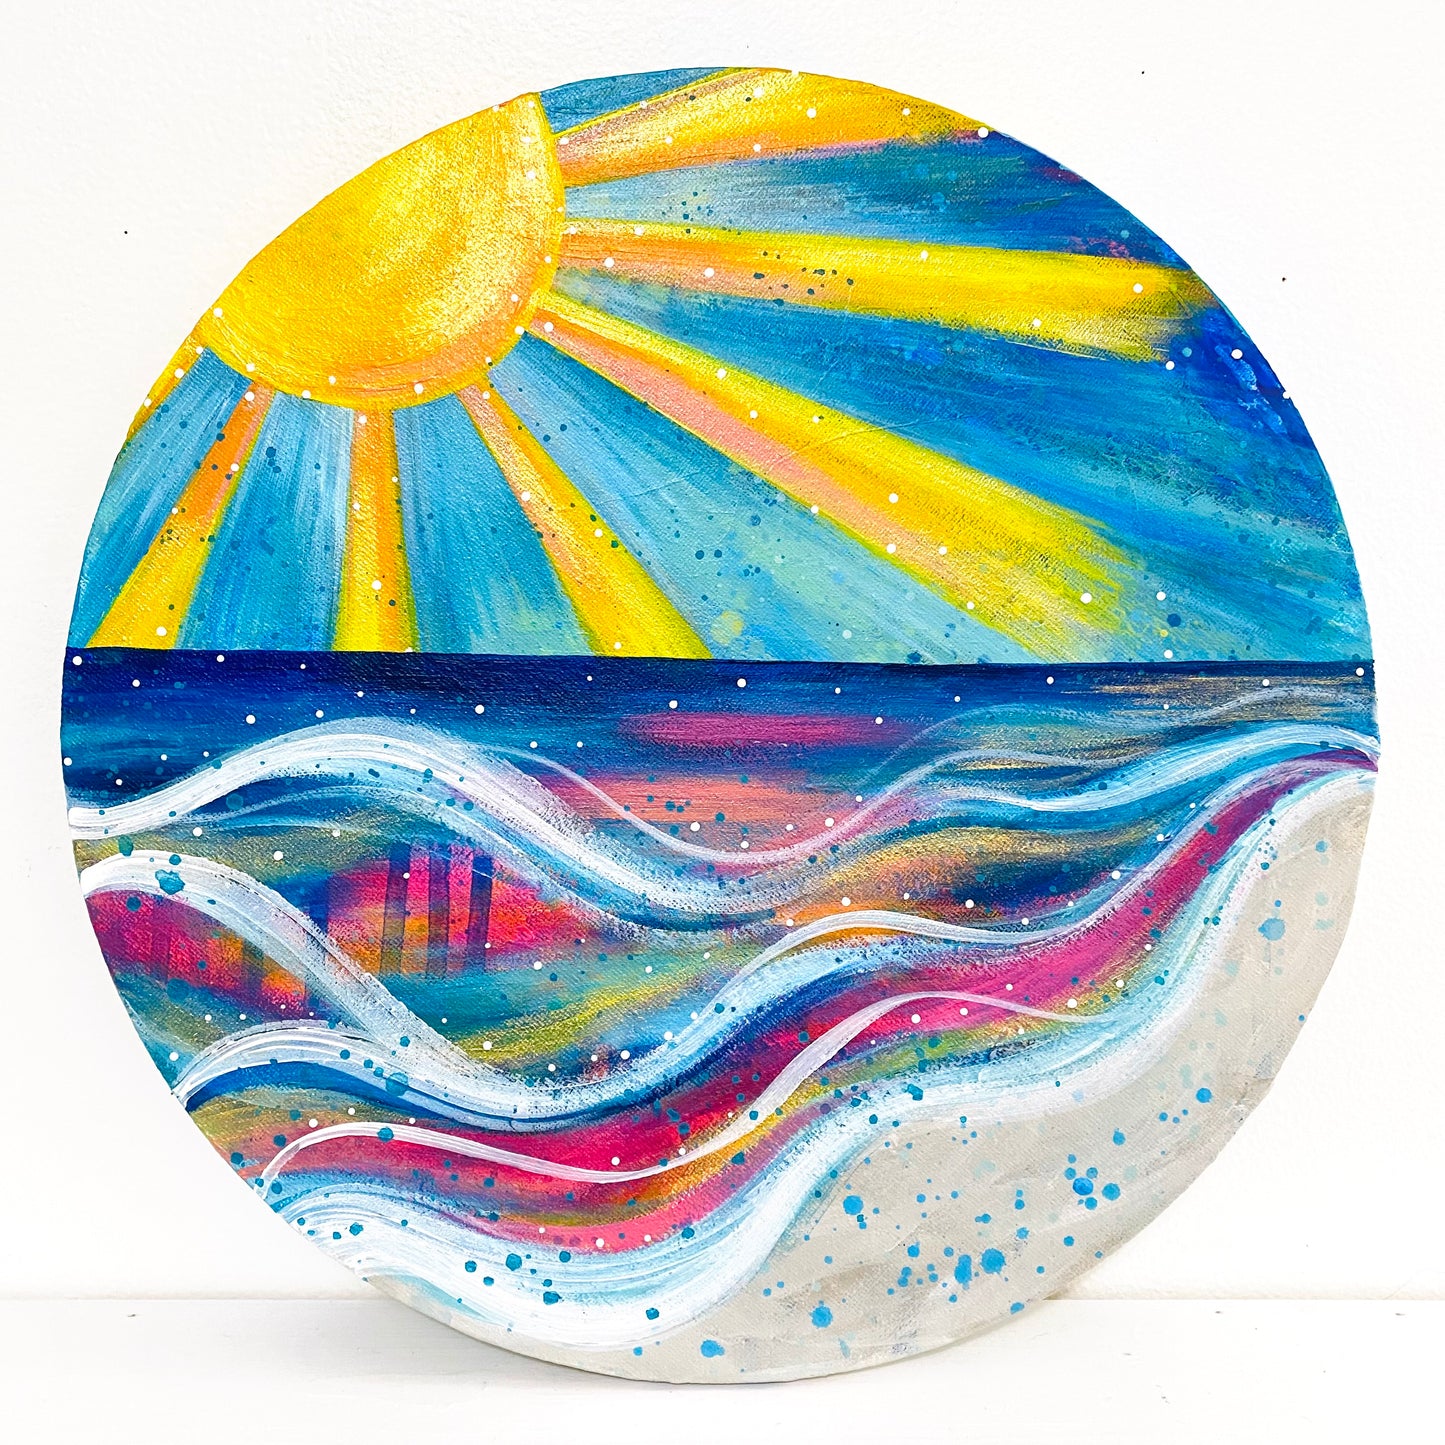 "Summertime Glow" 12 inch diamater circle Original Coastal Inspired Painting on Canvas with painted sides